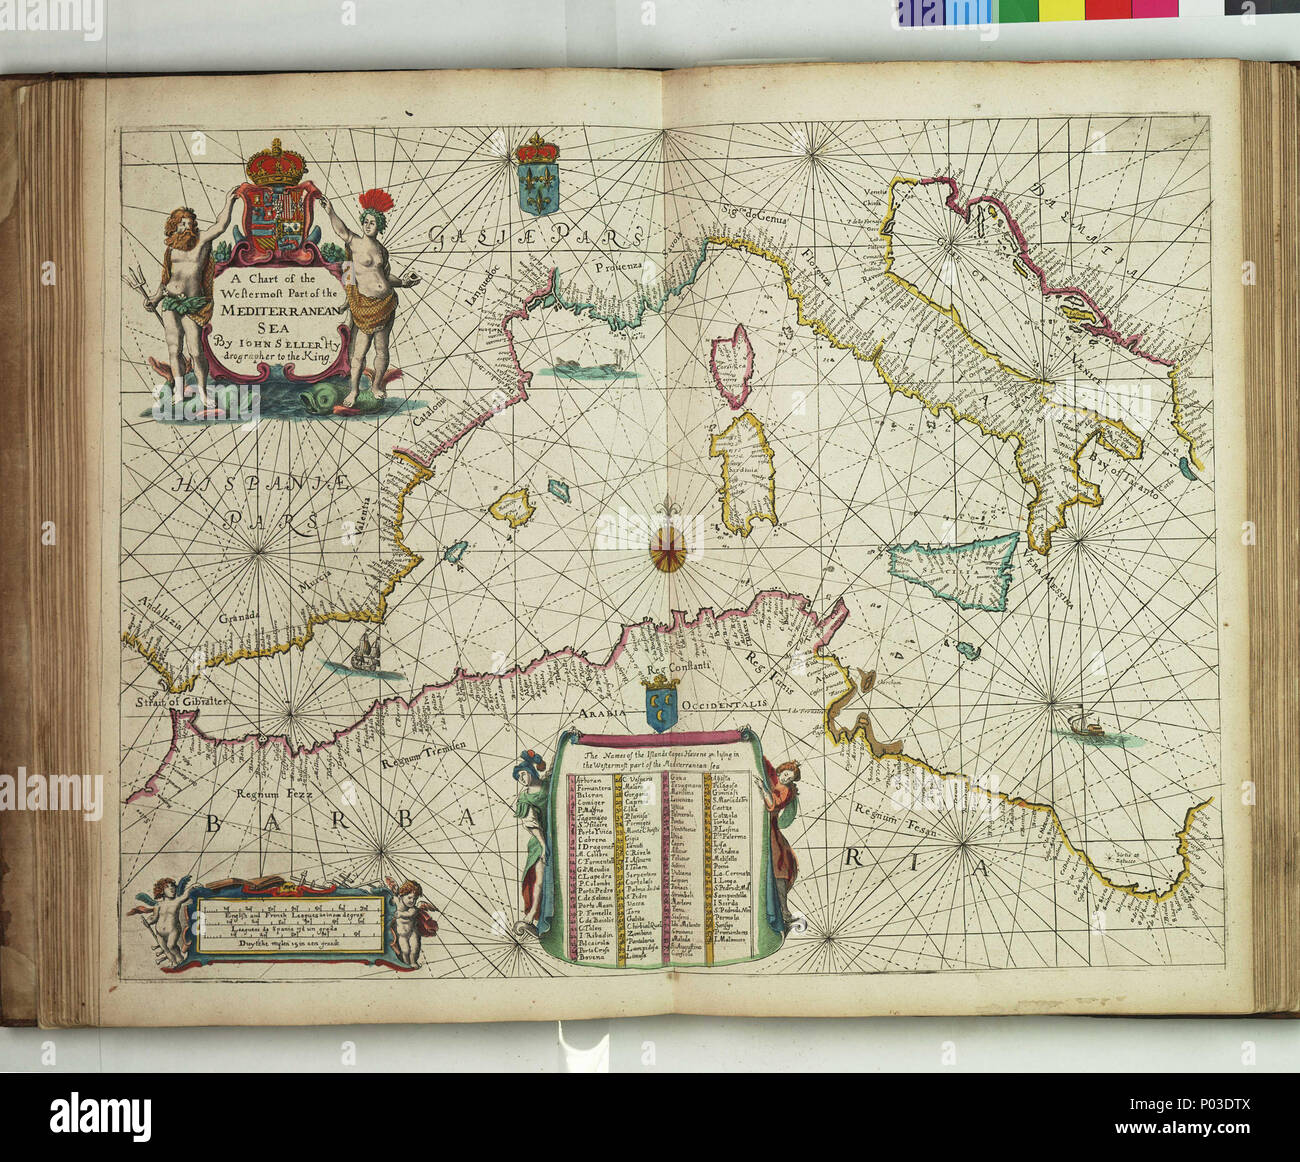 .  English: A chart of the westermost part of the Mediterranean Sea.Bound sheet. Hand col engr. Scale: [ca. 1:5 000 000 (bar)]. Cartographic Note: Borders graduated for latitude. Bar scales in English and French leagues, Spanish leagues and Dutch miles. Contents Note: Contains an inset list of names of islands, capes, havens etc. A chart from 'Atlas Maritimus', or the Sea Atlas; being a book of maritime charts. PBE6862, Seller Atlas Maritimus, w. part of Medit.  . 1675. John Darby; Seller, John 35 A chart of the westermost part of the Mediterranean Sea. RMG F8066 Stock Photo